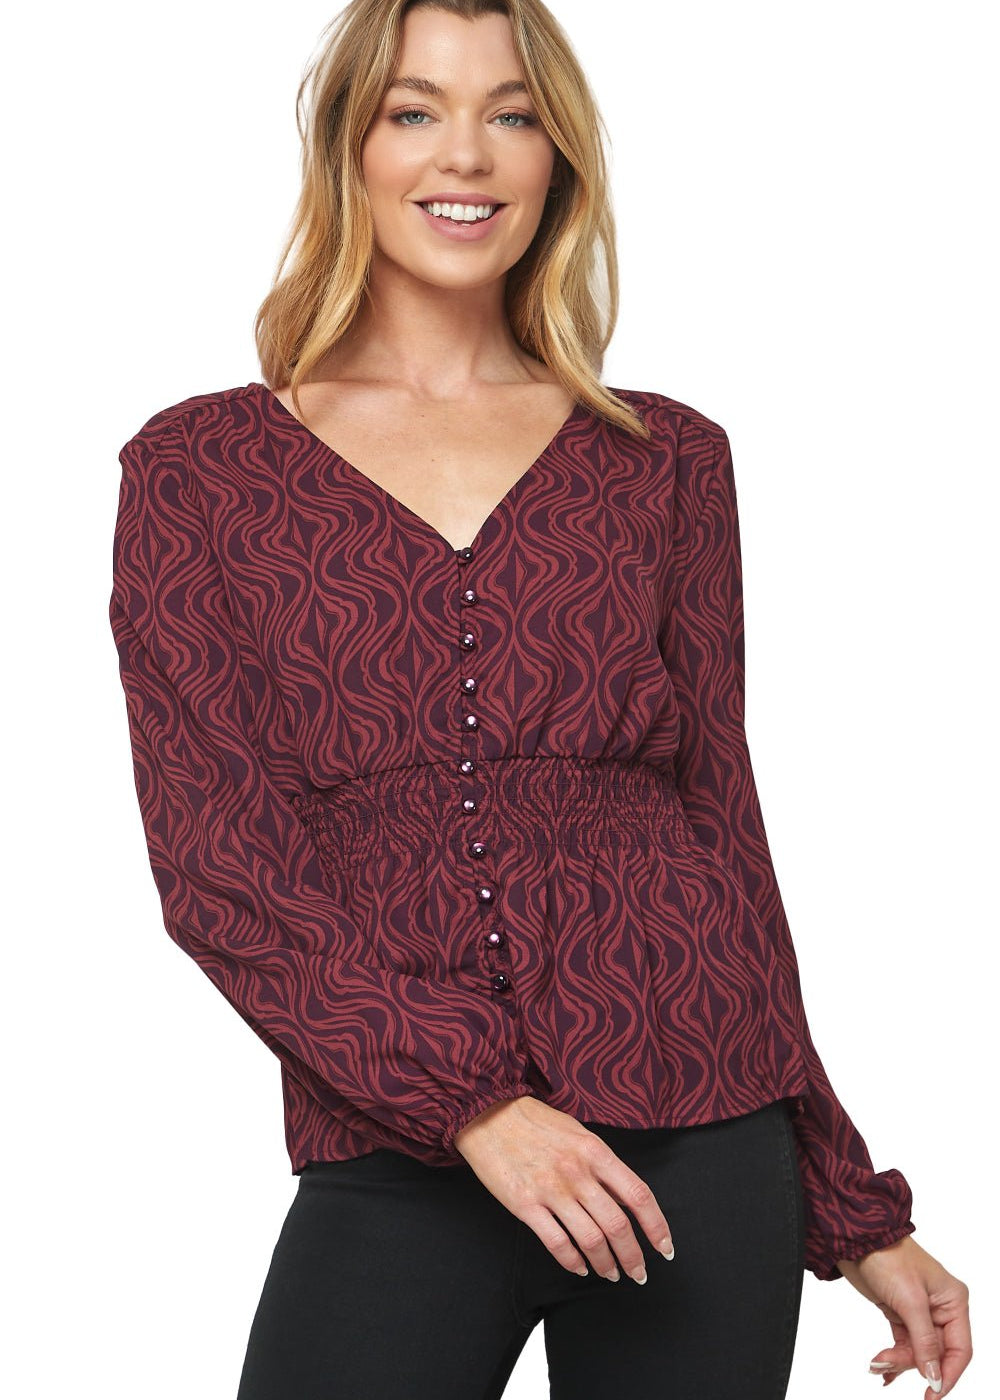 Sara Michelle Long Sleeve V-Neck with Faux Button Front and Elastic Smock Waist Blouse - DressbarnShirts & Blouses